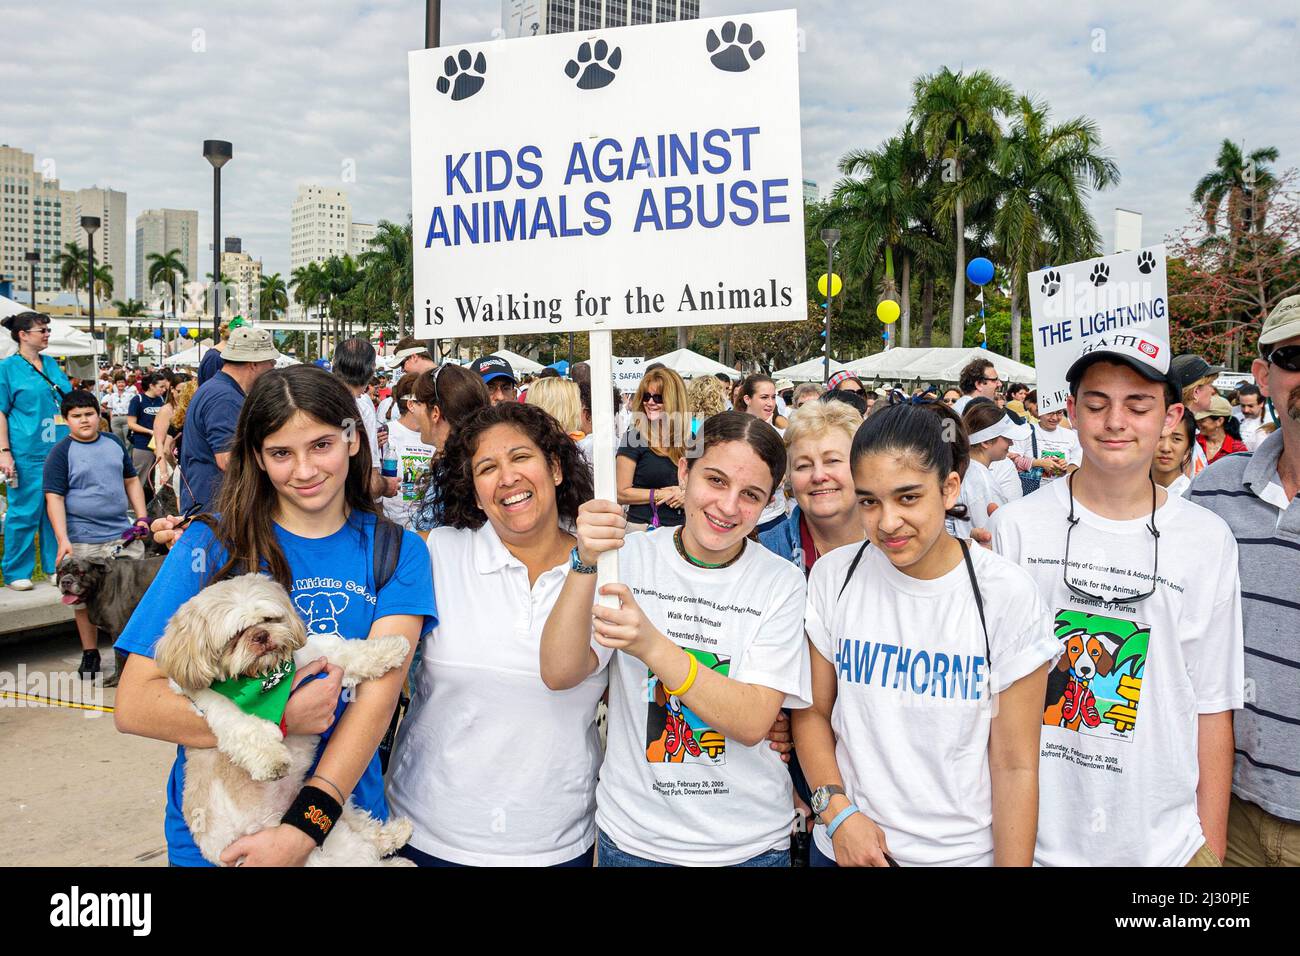 Miami Florida,Bayfront Park,Walk for Animals,Humane Society event,holding dog,Kids Against Animal Abuse,teen teens teenage teenagers supporting cause Stock Photo